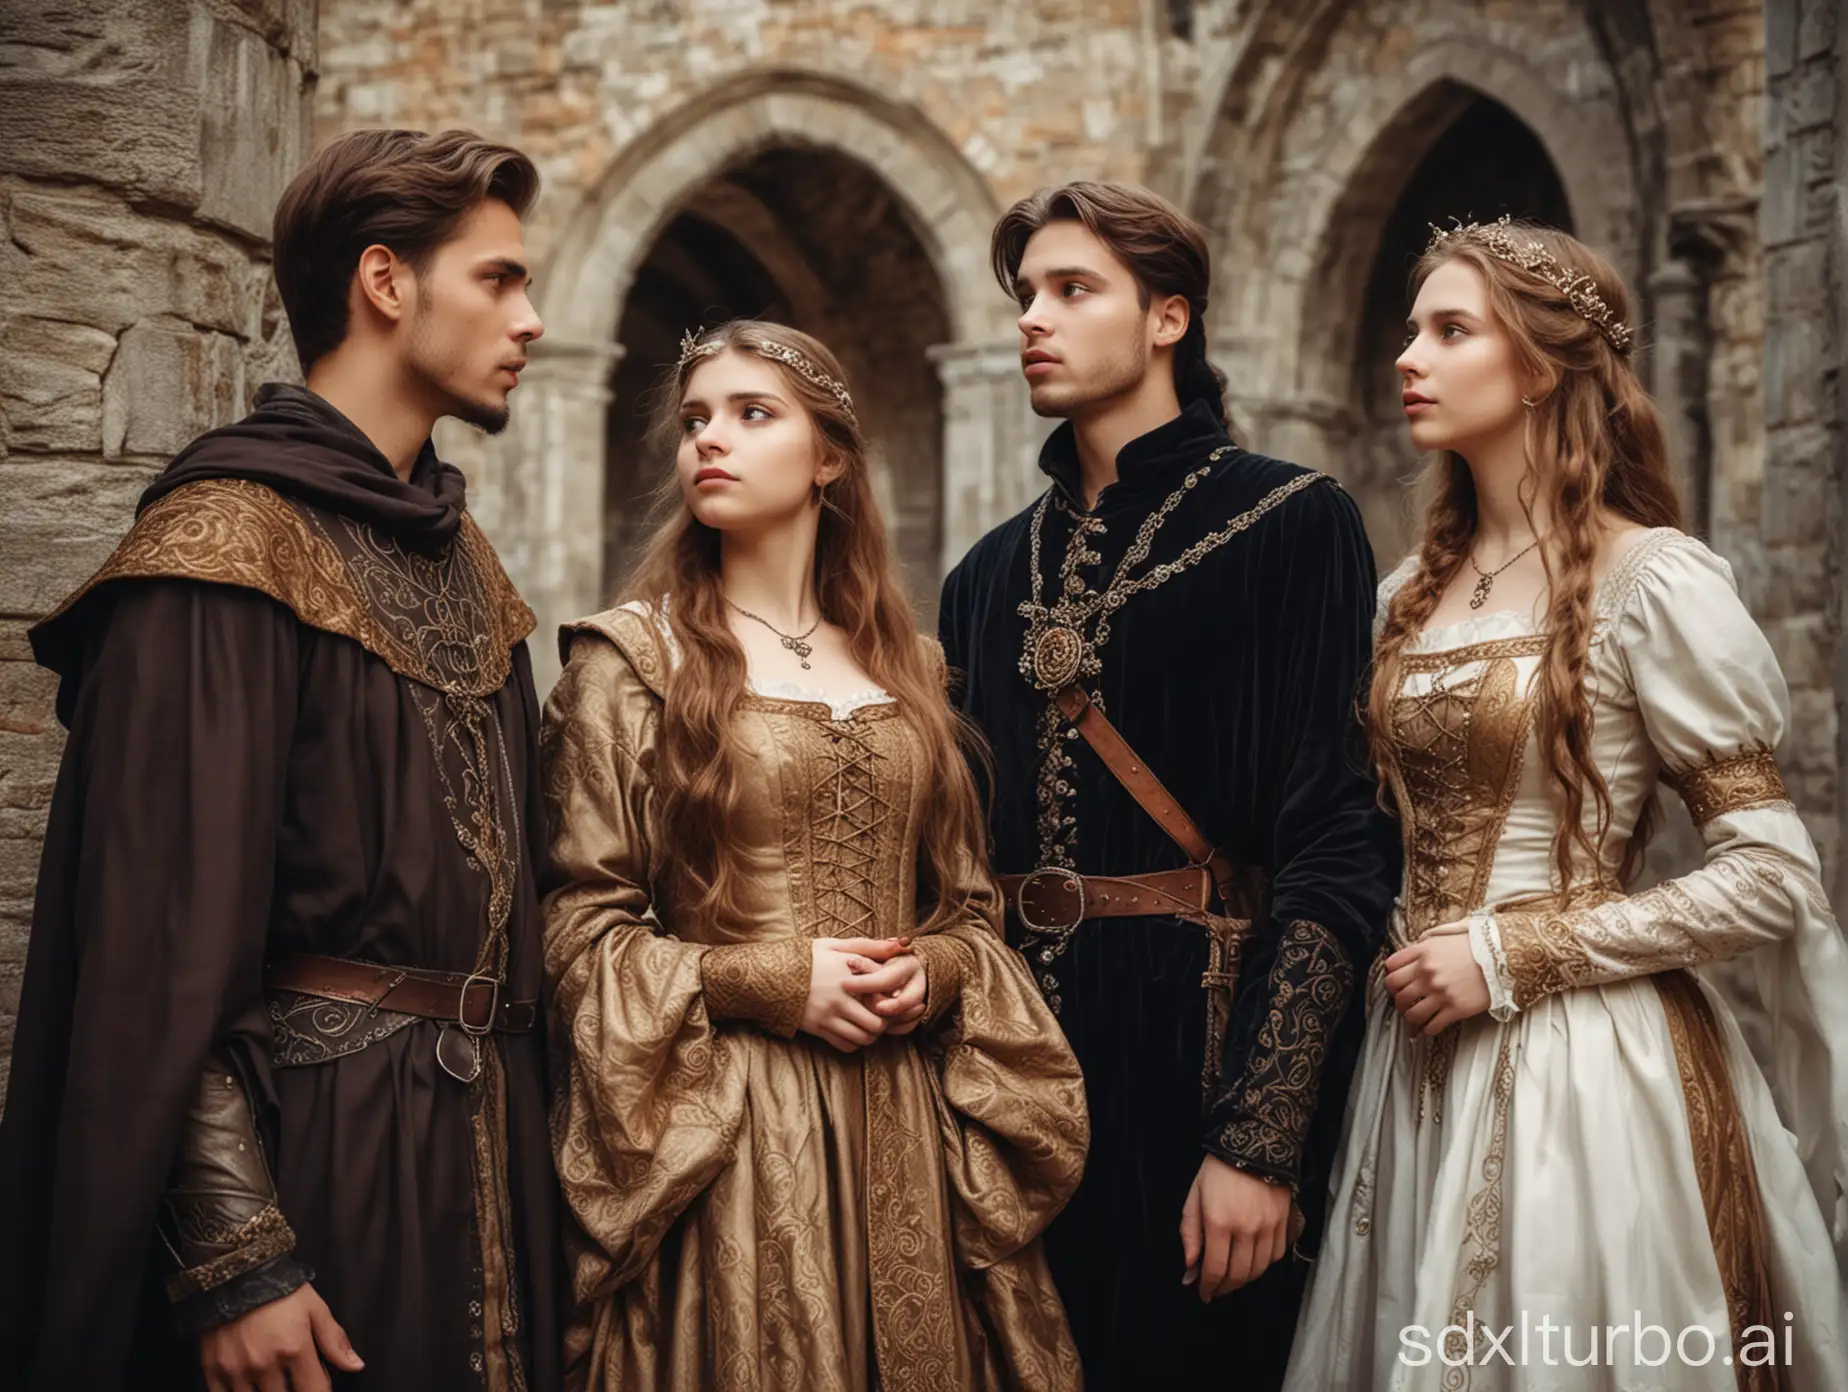 Two girls and a gue look somewhere with amazed. All dressed in rich medieval fantasy style, 